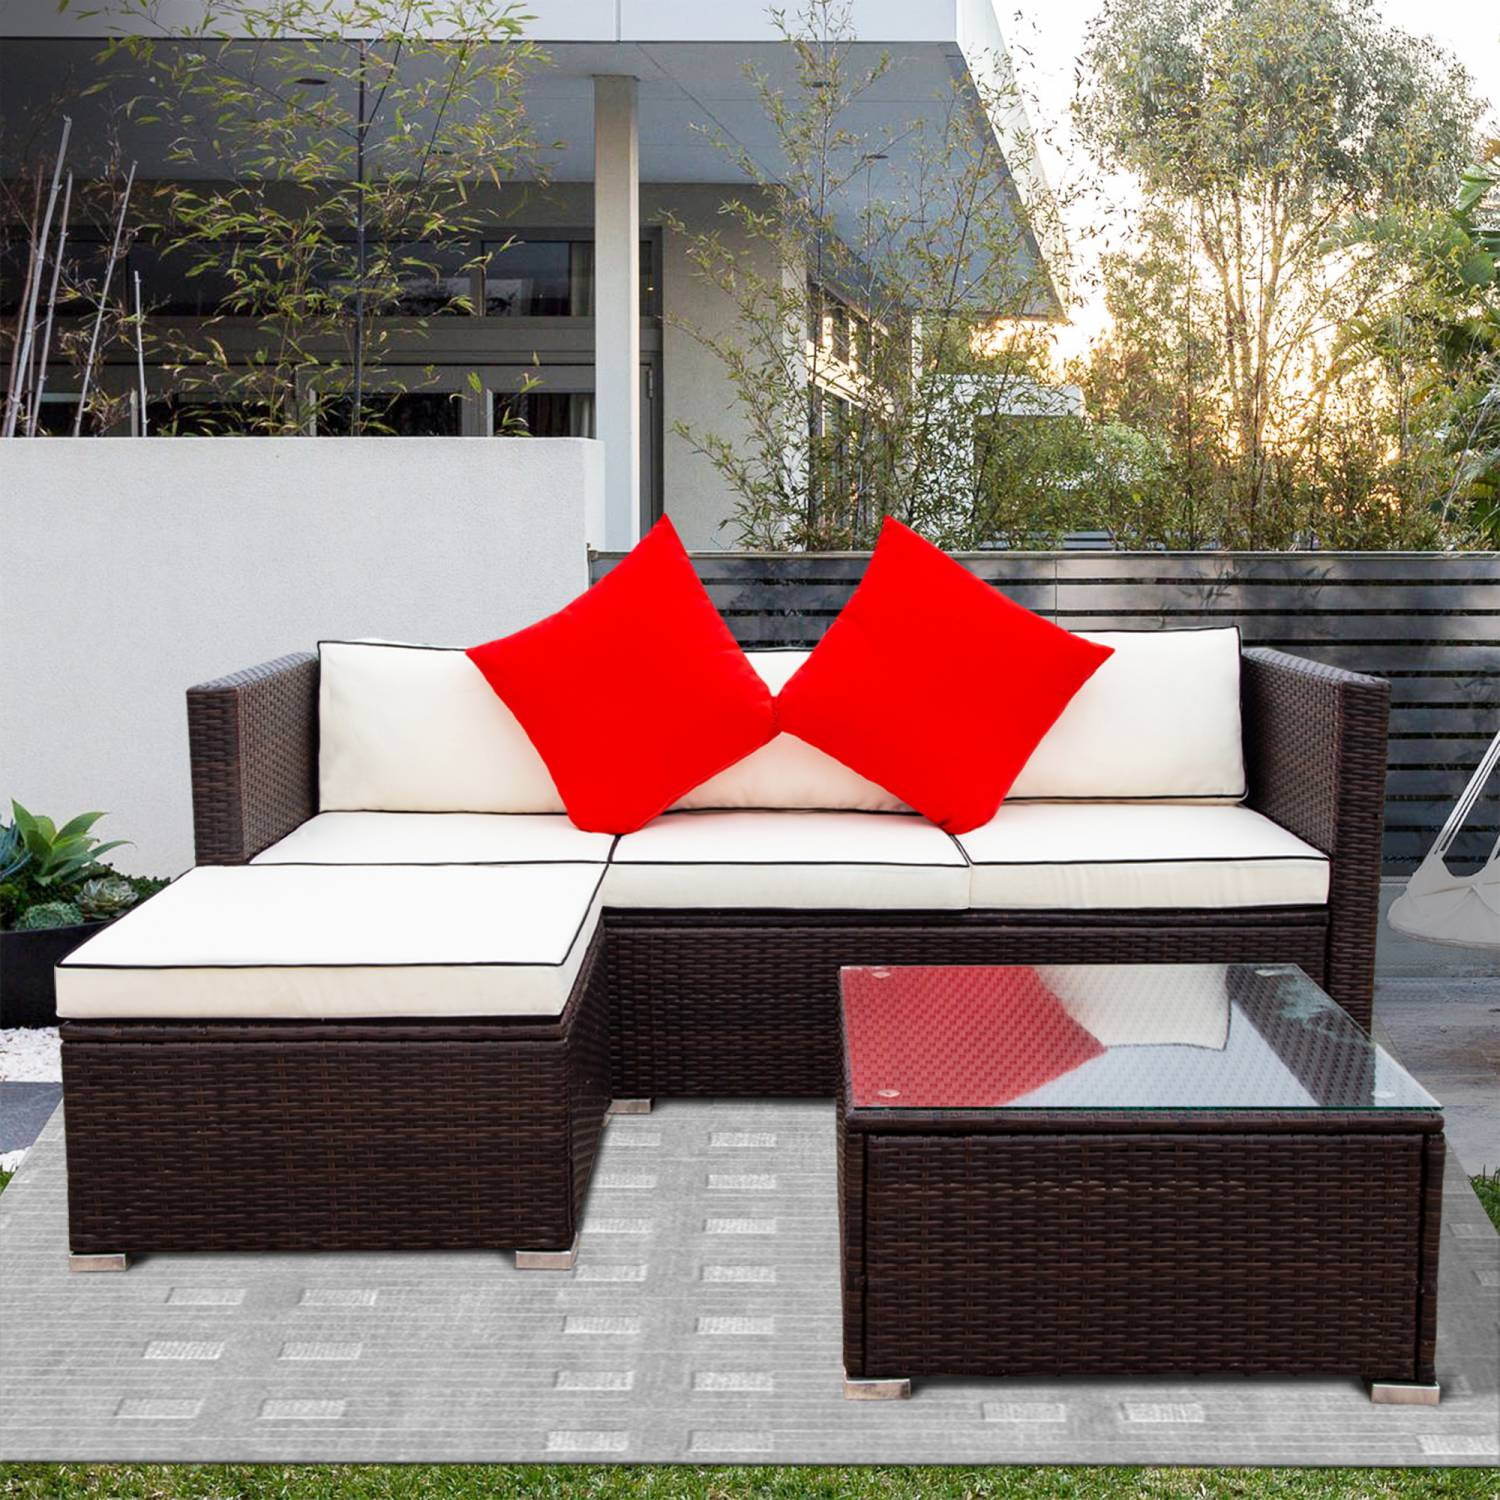 SUNLEI Outdoor Furniture Patio Sets,Low Back All-Weather Small Rattan Sectional Sofa with Tea Table&Washable Couch Cushions&Upgrade Wicker（Blue）